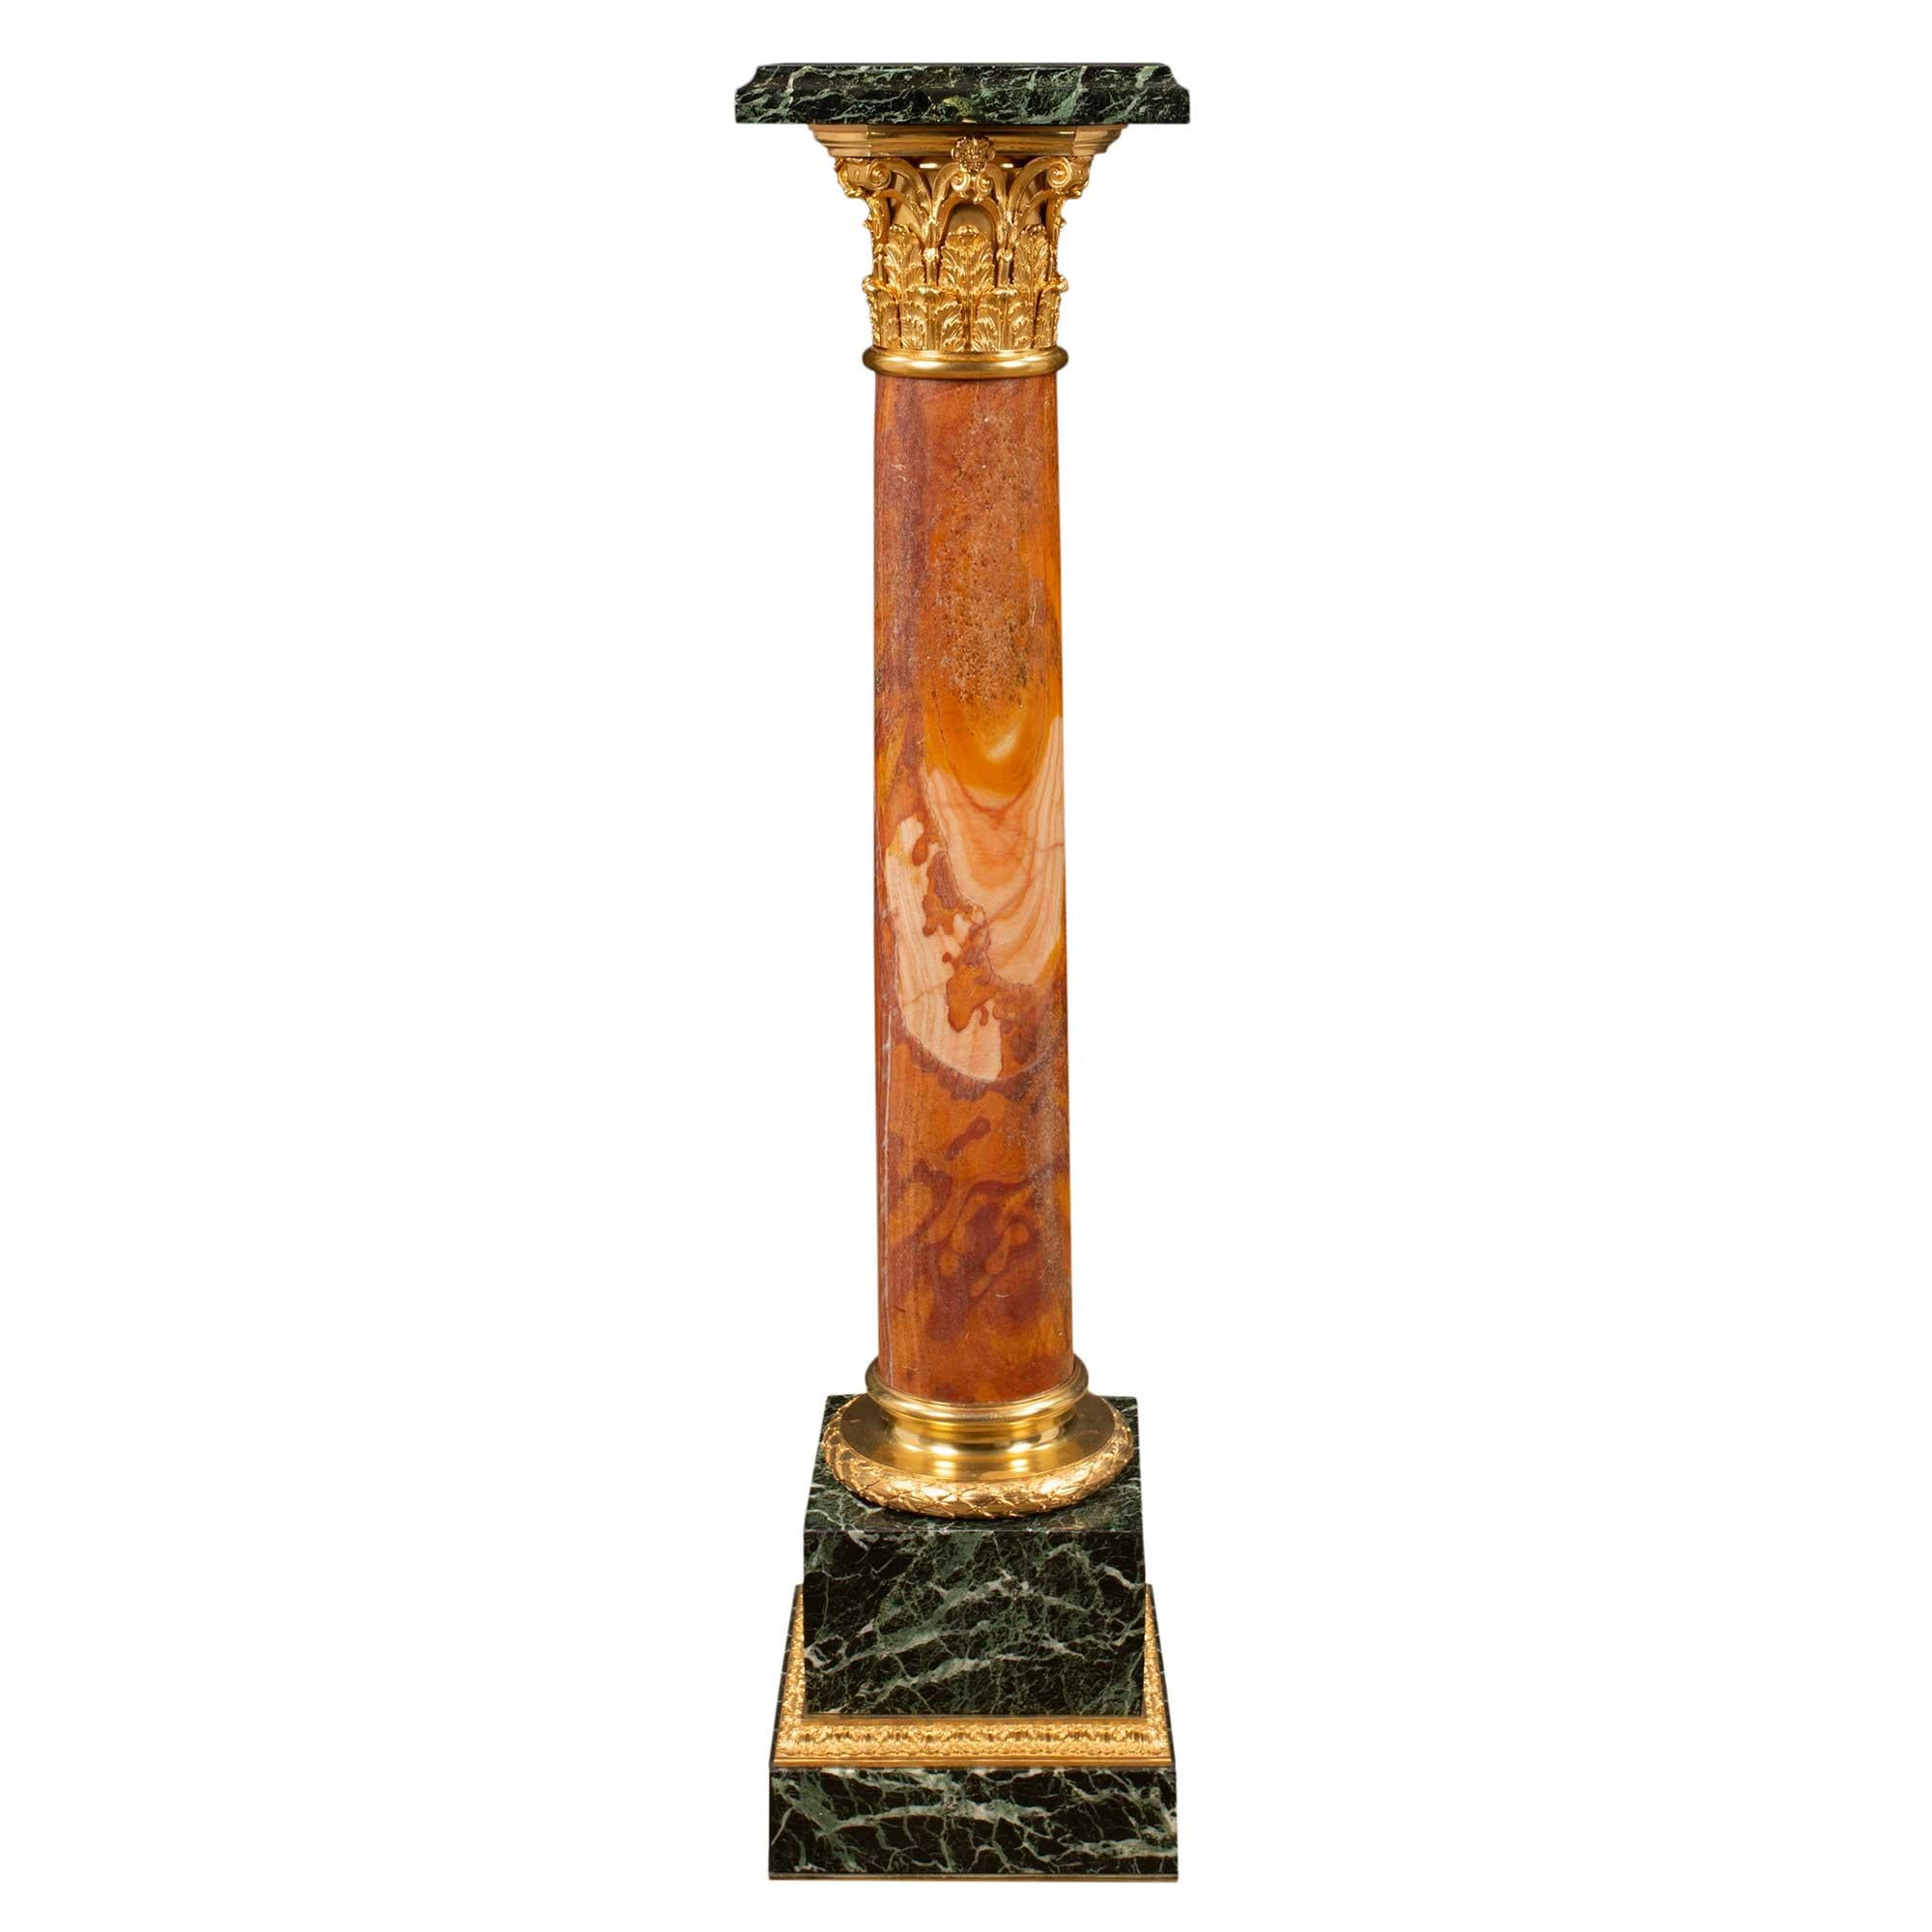 French Mid-19th Century Louis XVI Style Pedestal Column in Marble and Ormolu For Sale 1